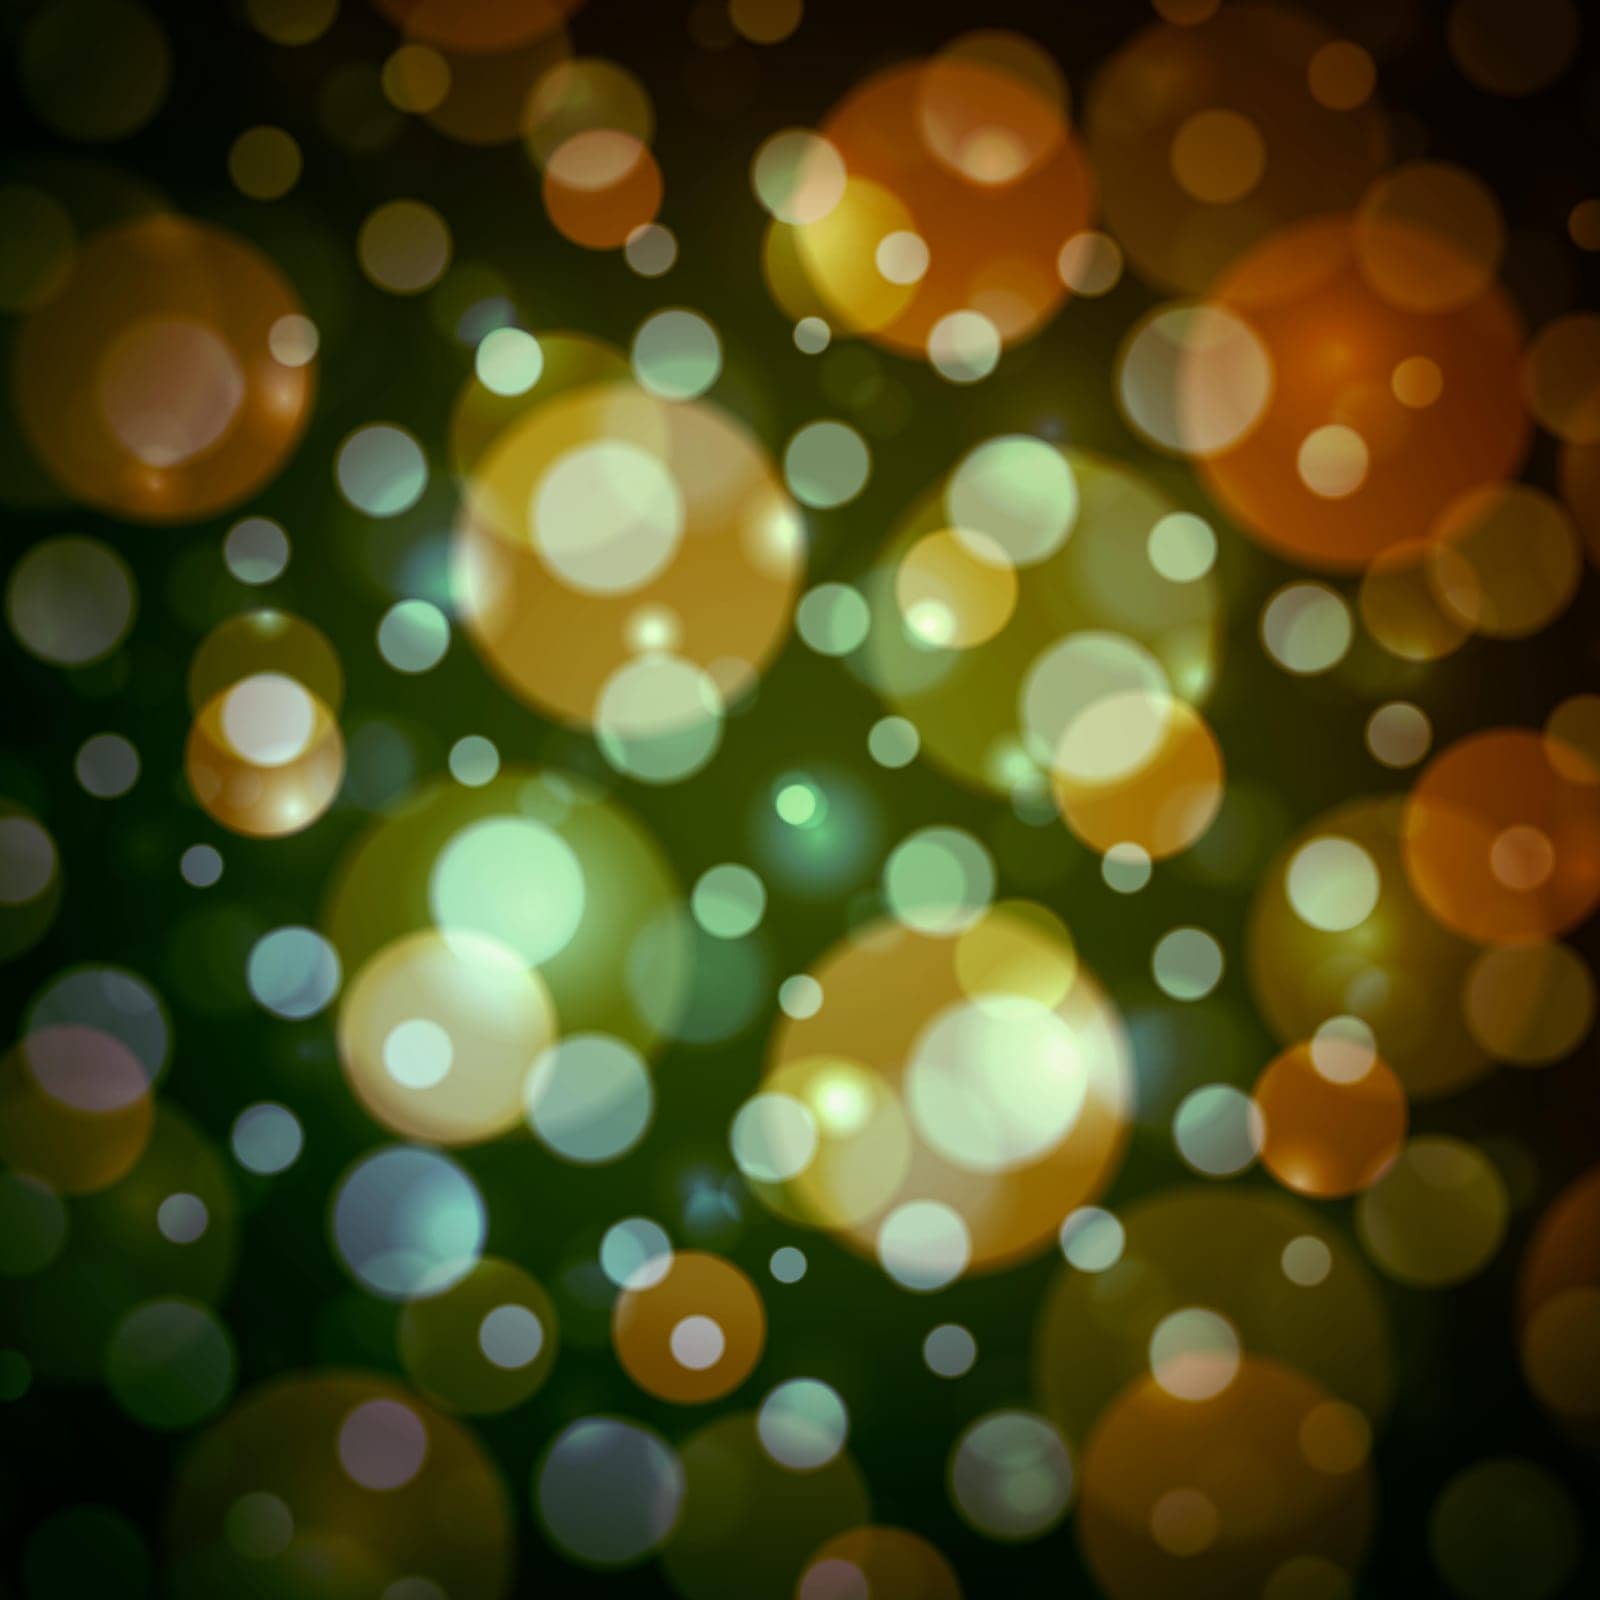 A plethora of soft, warm, glowing bokeh circles gently overlap to create a cozy and inviting abstract background suggestive of festive lights or a dreamy nocturnal scene.